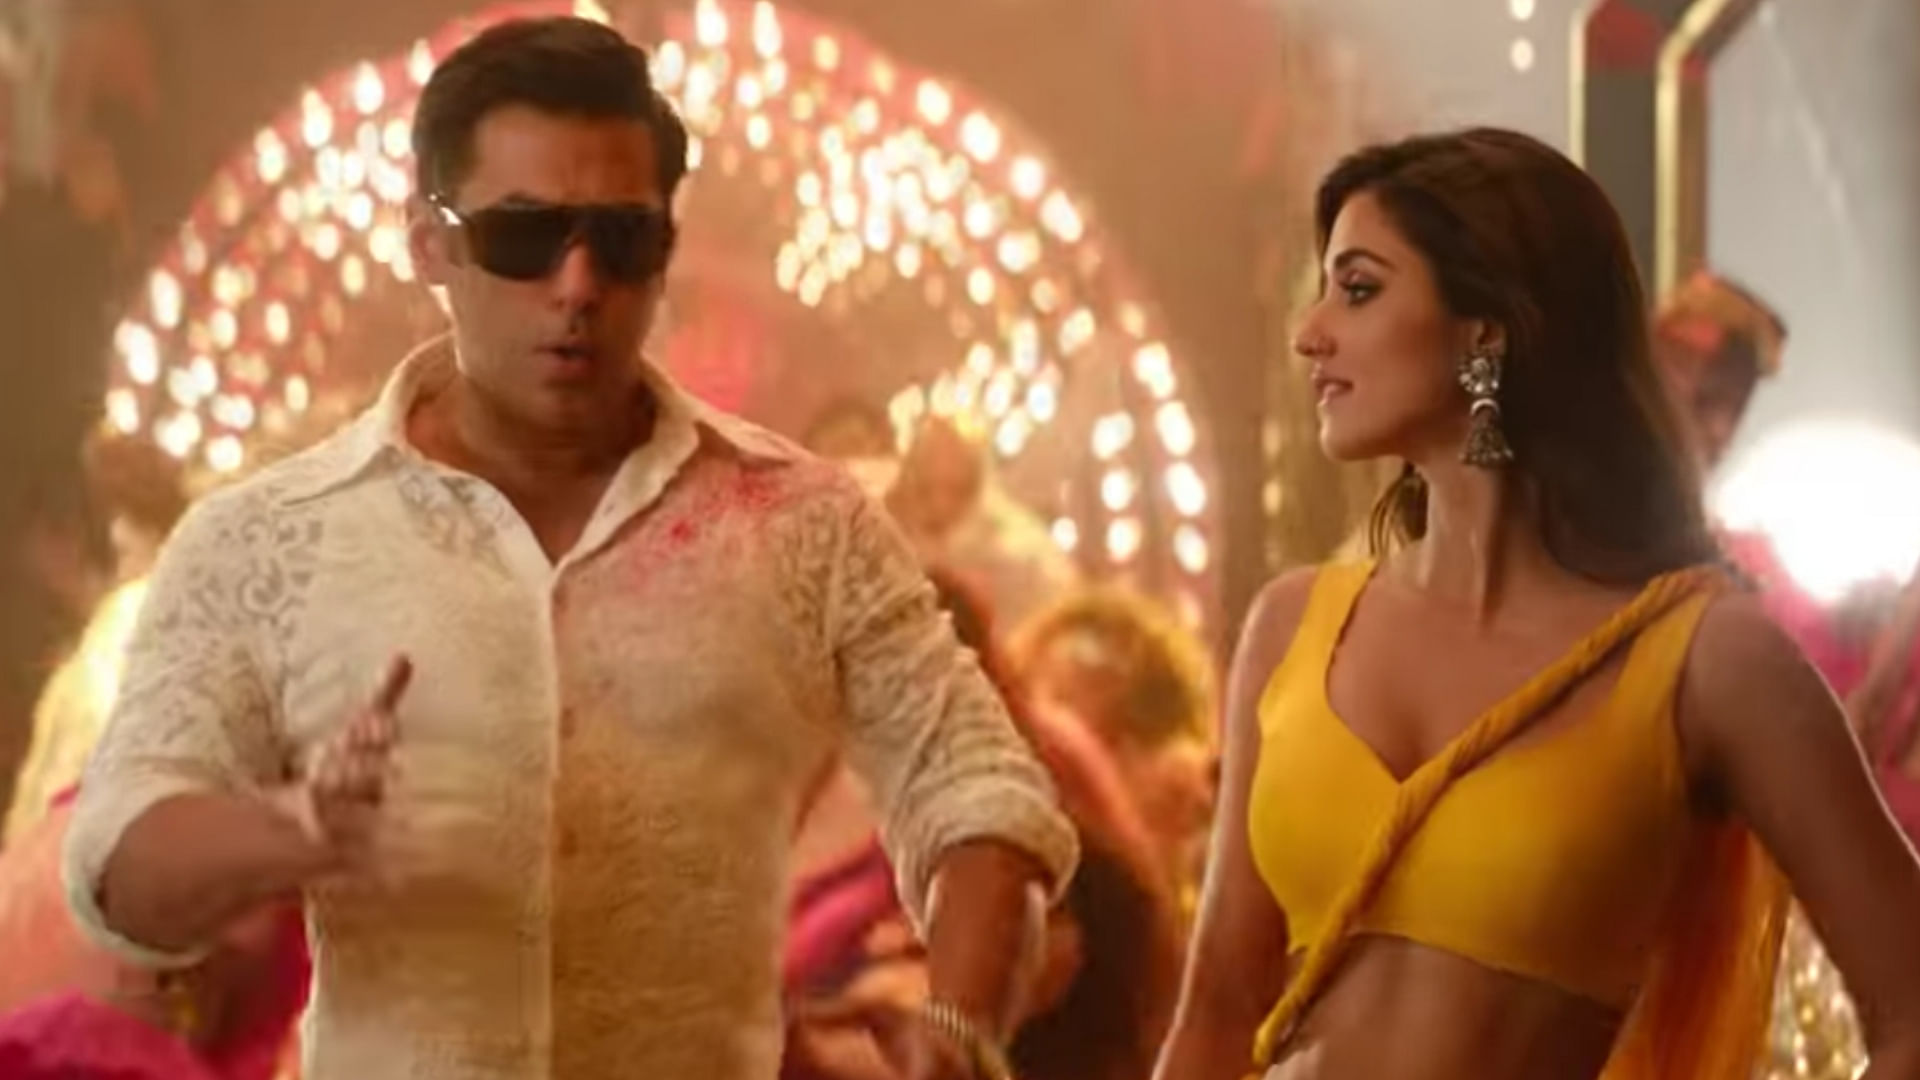 Salman Khan and Disha Patani in ‘Slow Motion’, the first song from <i>Bharat</i>.